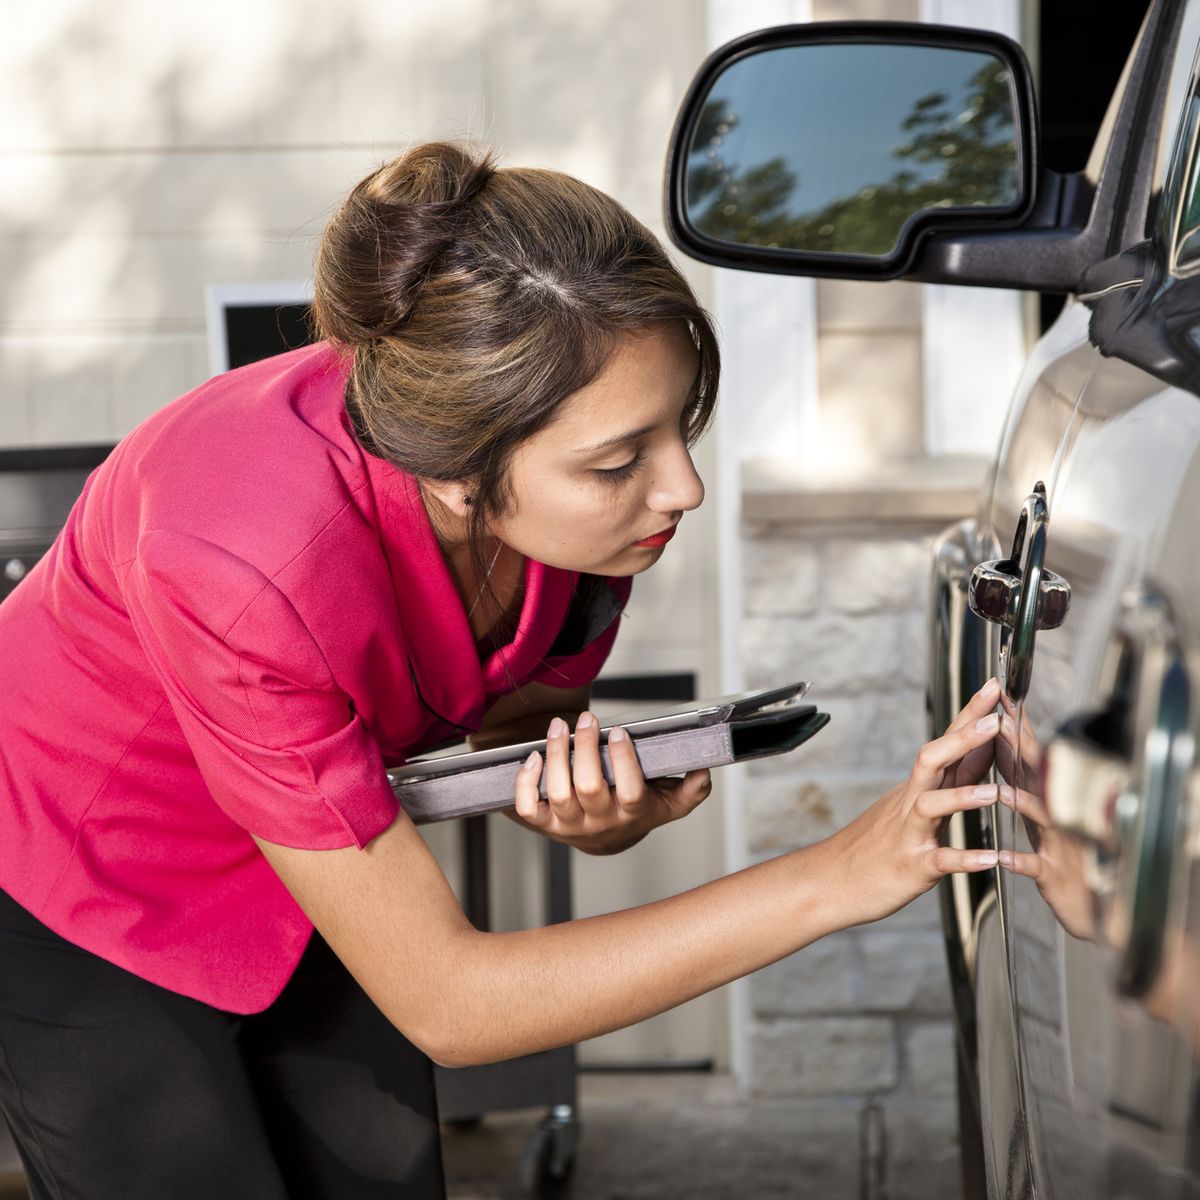 Car Inspections for Insurance: Everything You Need to Know